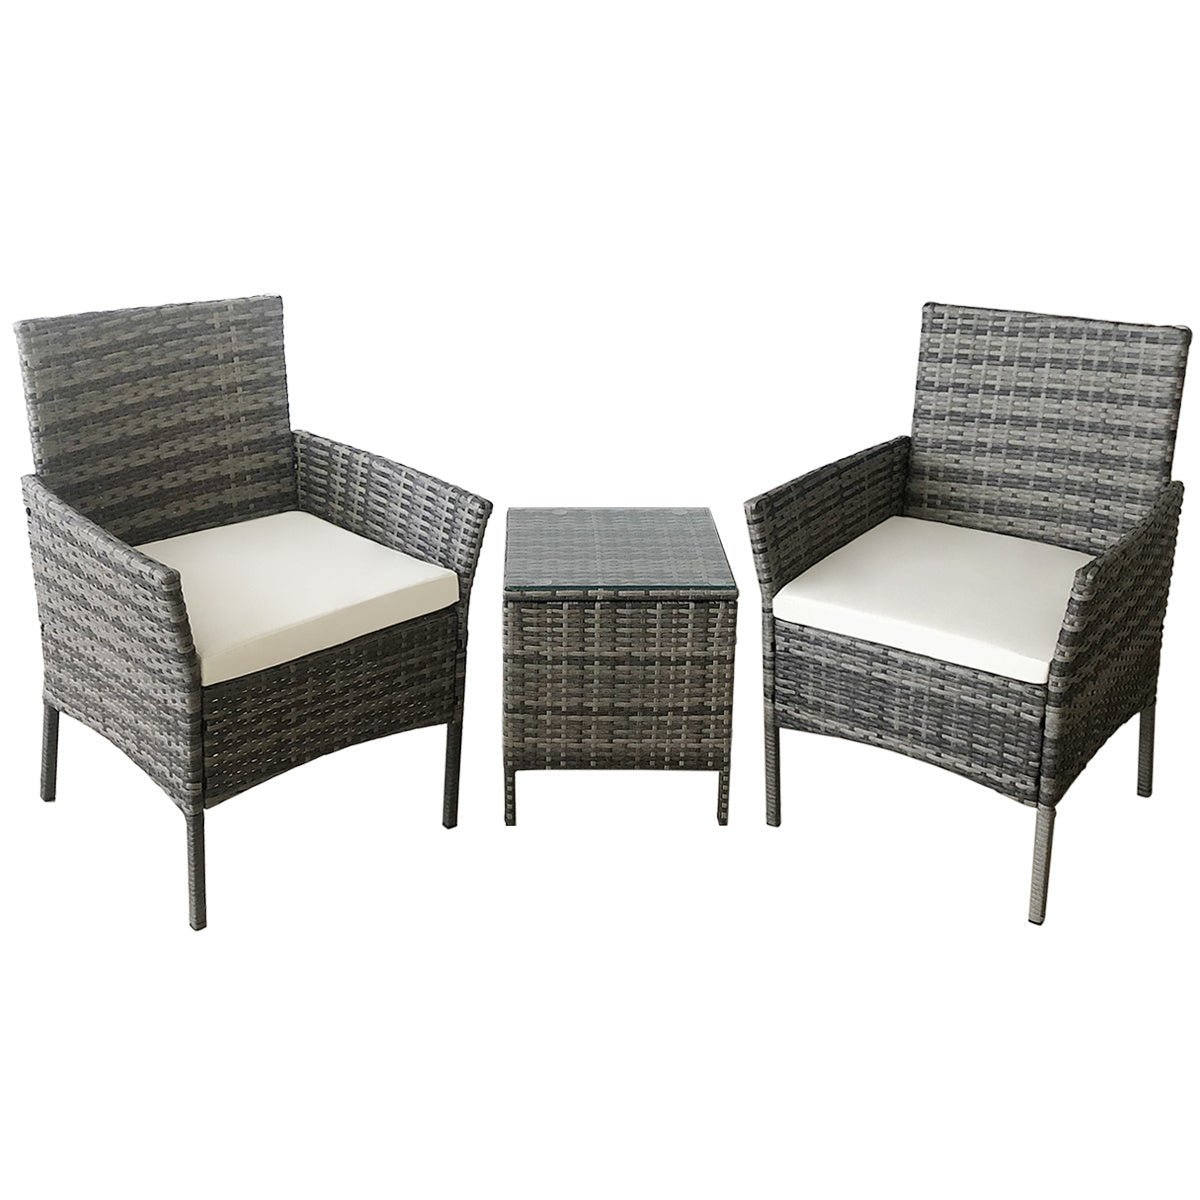 3 Pcs Outdoor Patio Rattan Furniture Set Modern Bistro Chairs and Side Table Set, PM1086